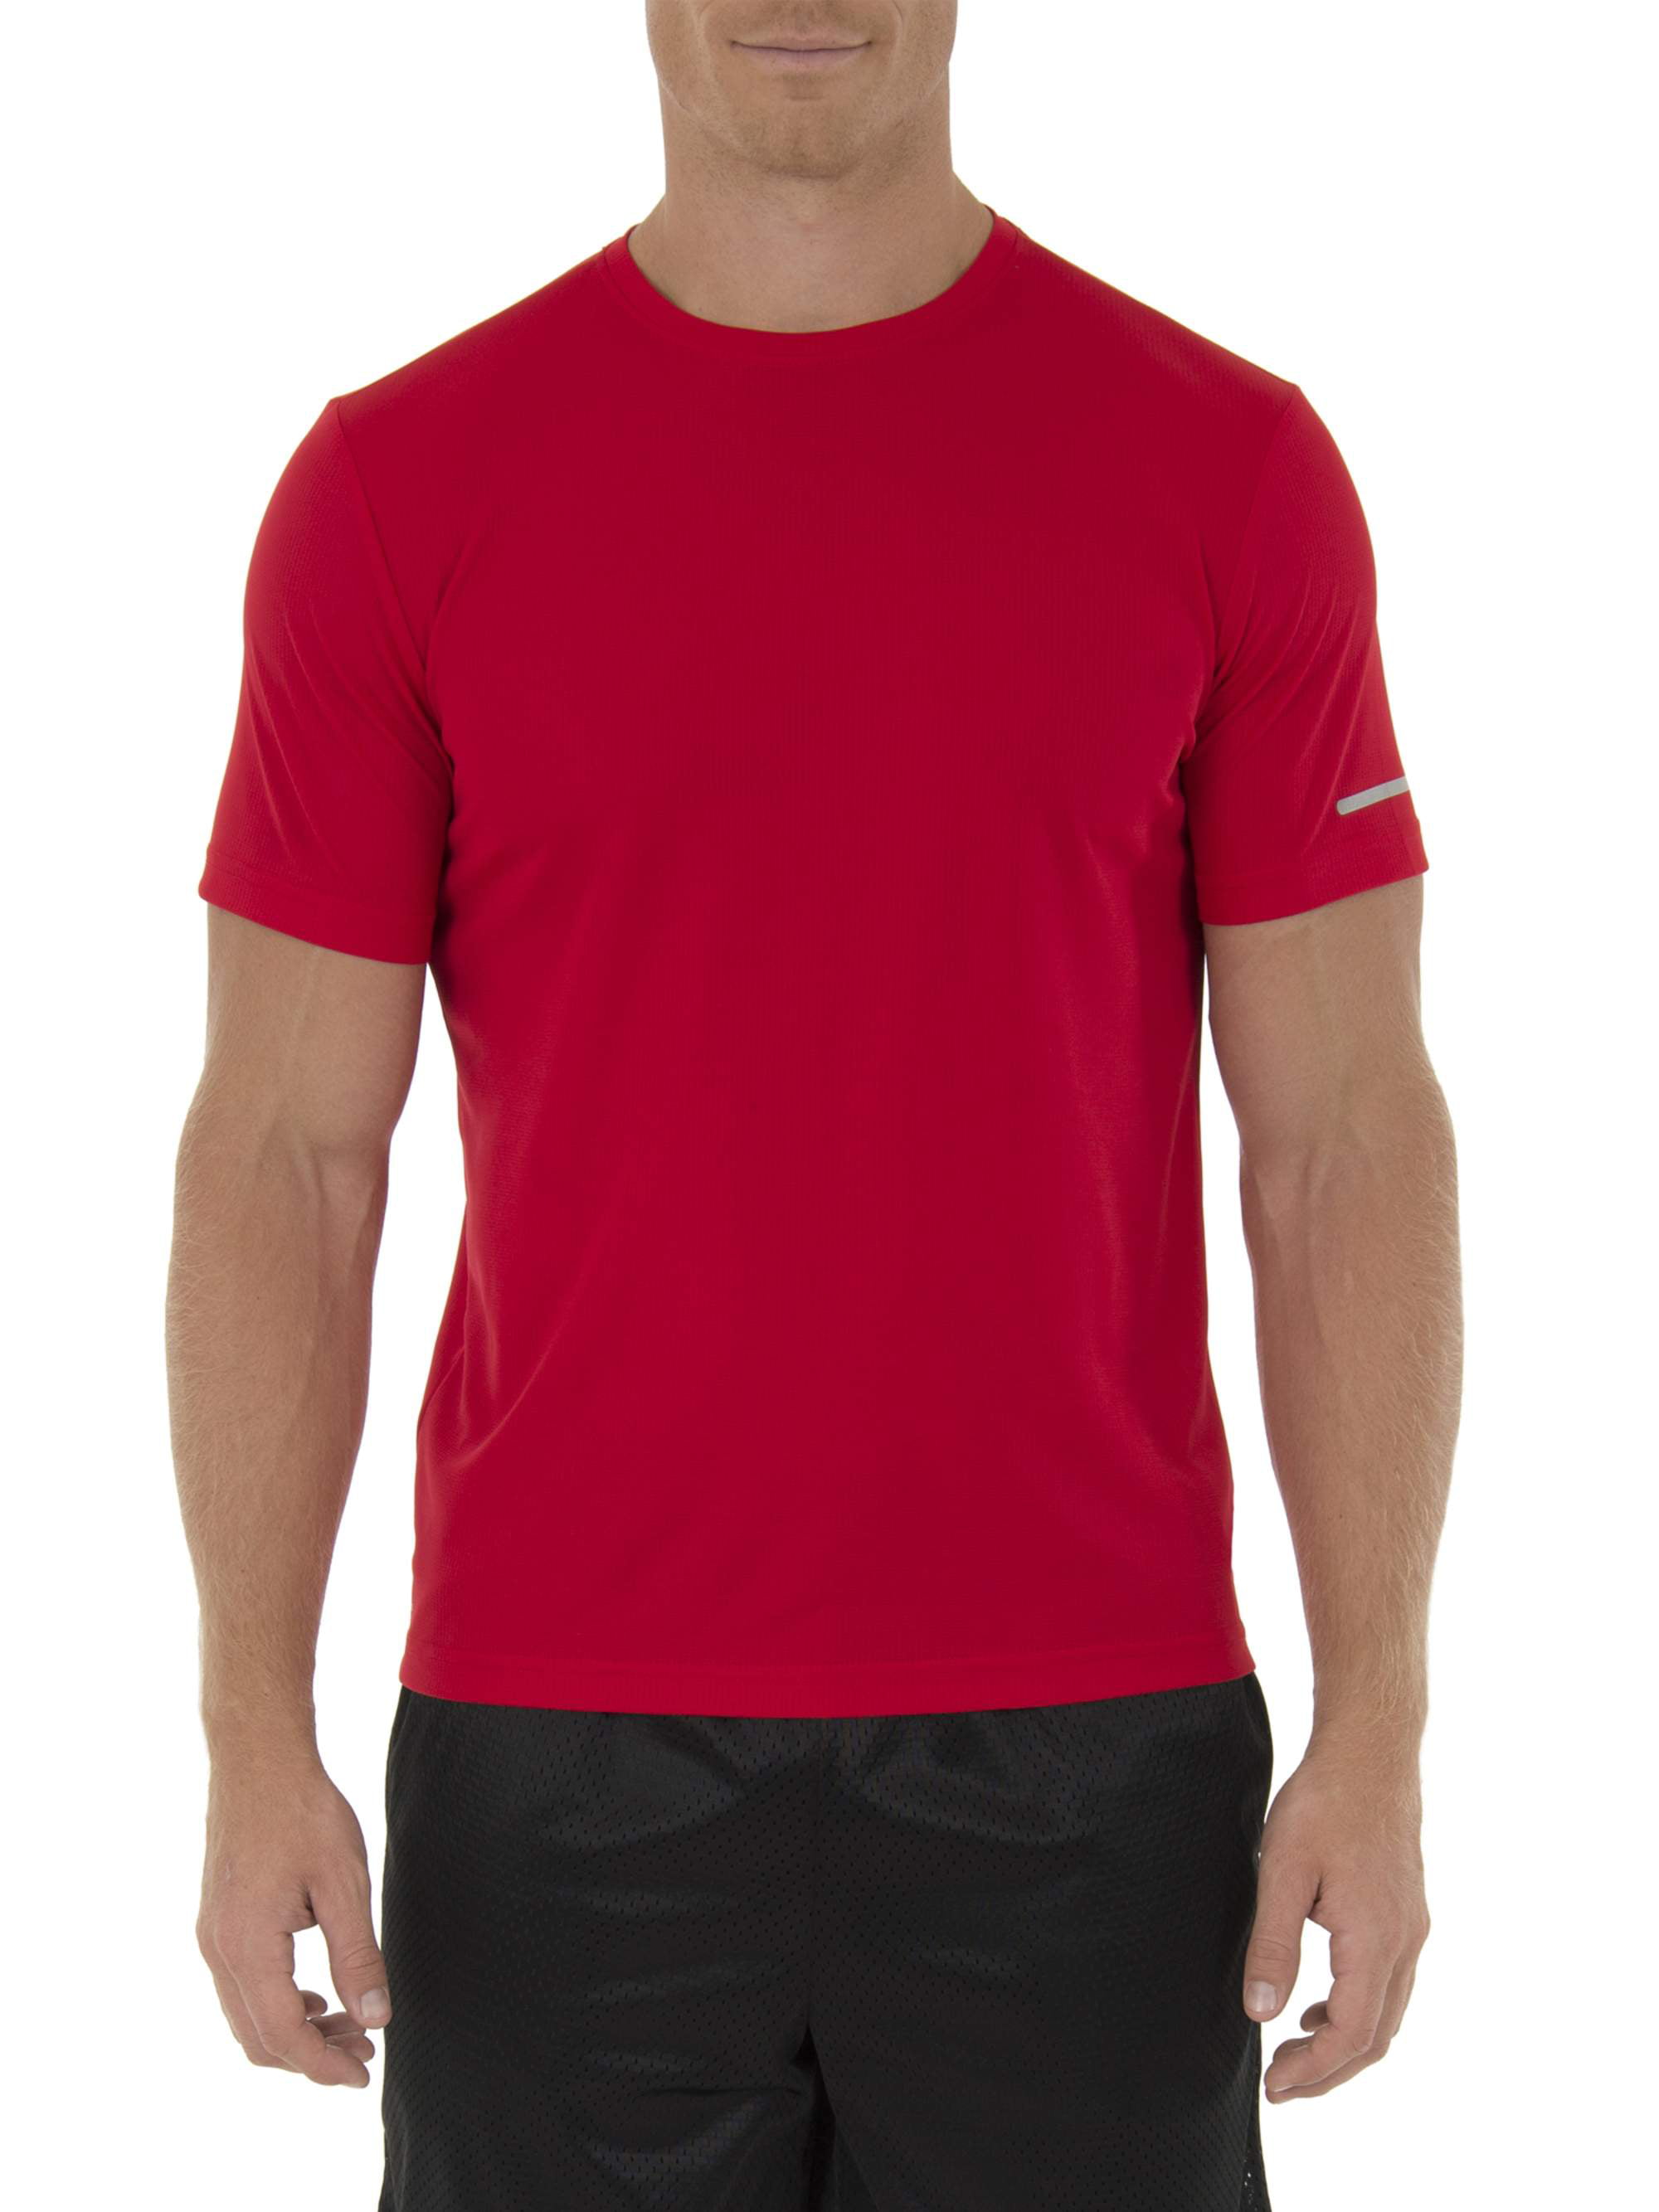 athletic works men's t shirts